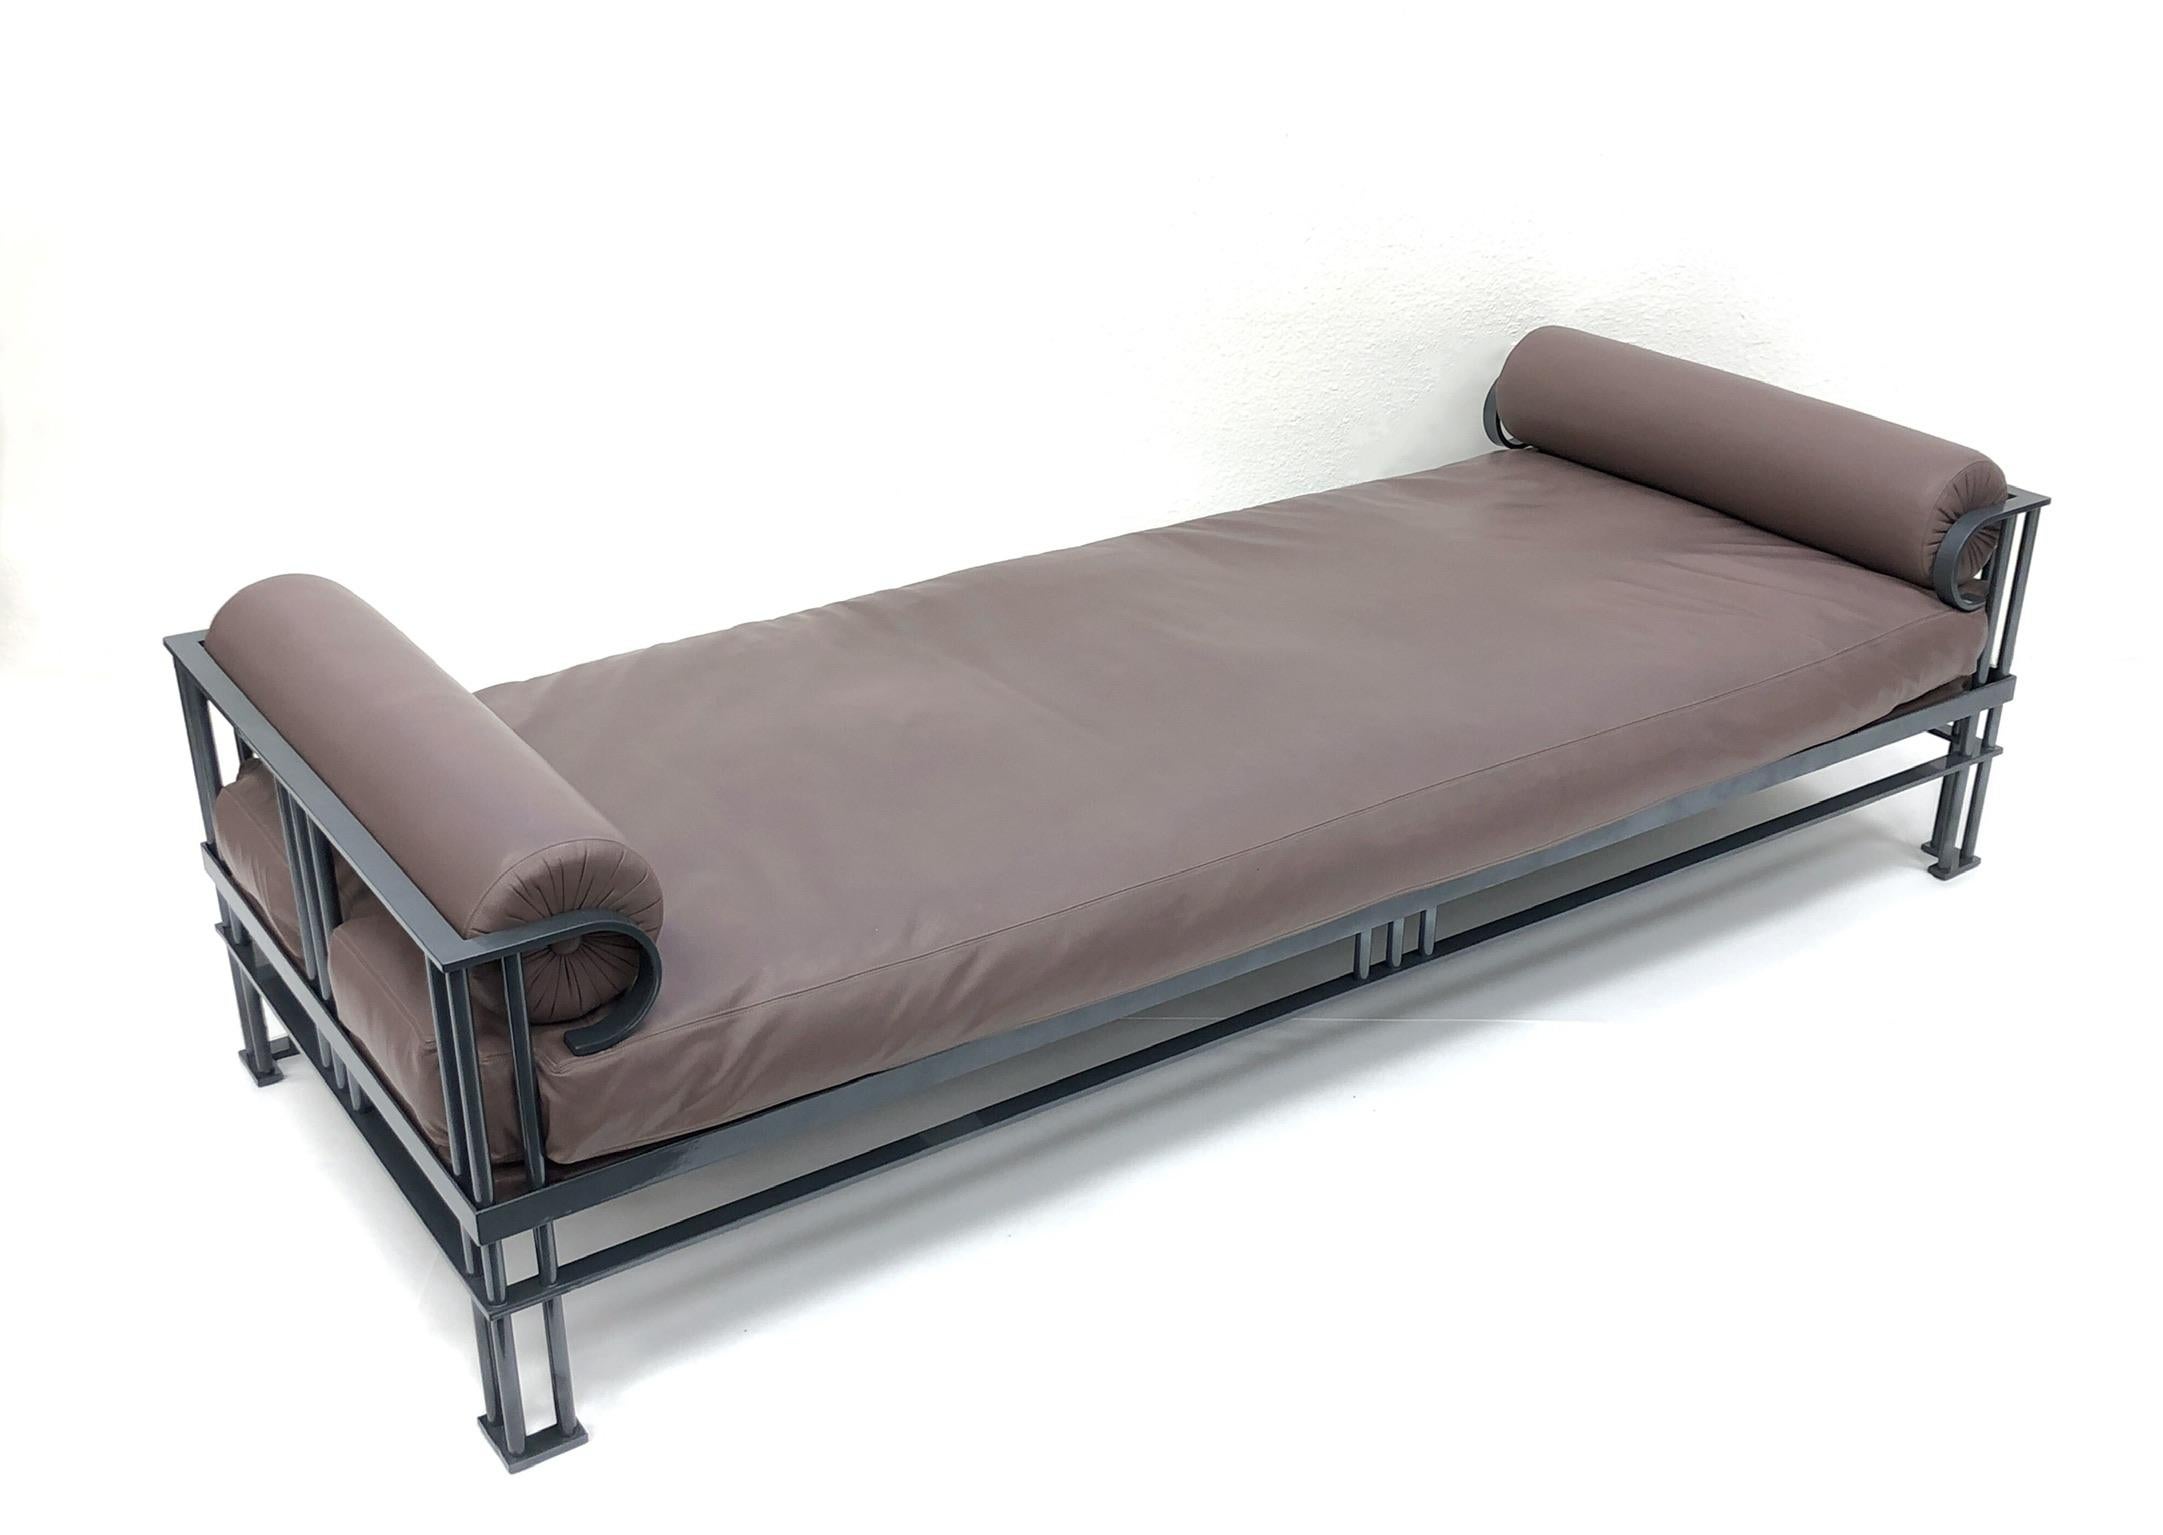 A spectacular 1980s Post-Modern Attila daybed designed by French Architect Jean Michele Wilmotte for Mirak and special ordered by Steve Chase. The Daybeds frames is solid steel that has been newly powder coated charcoal gray as originally was. The